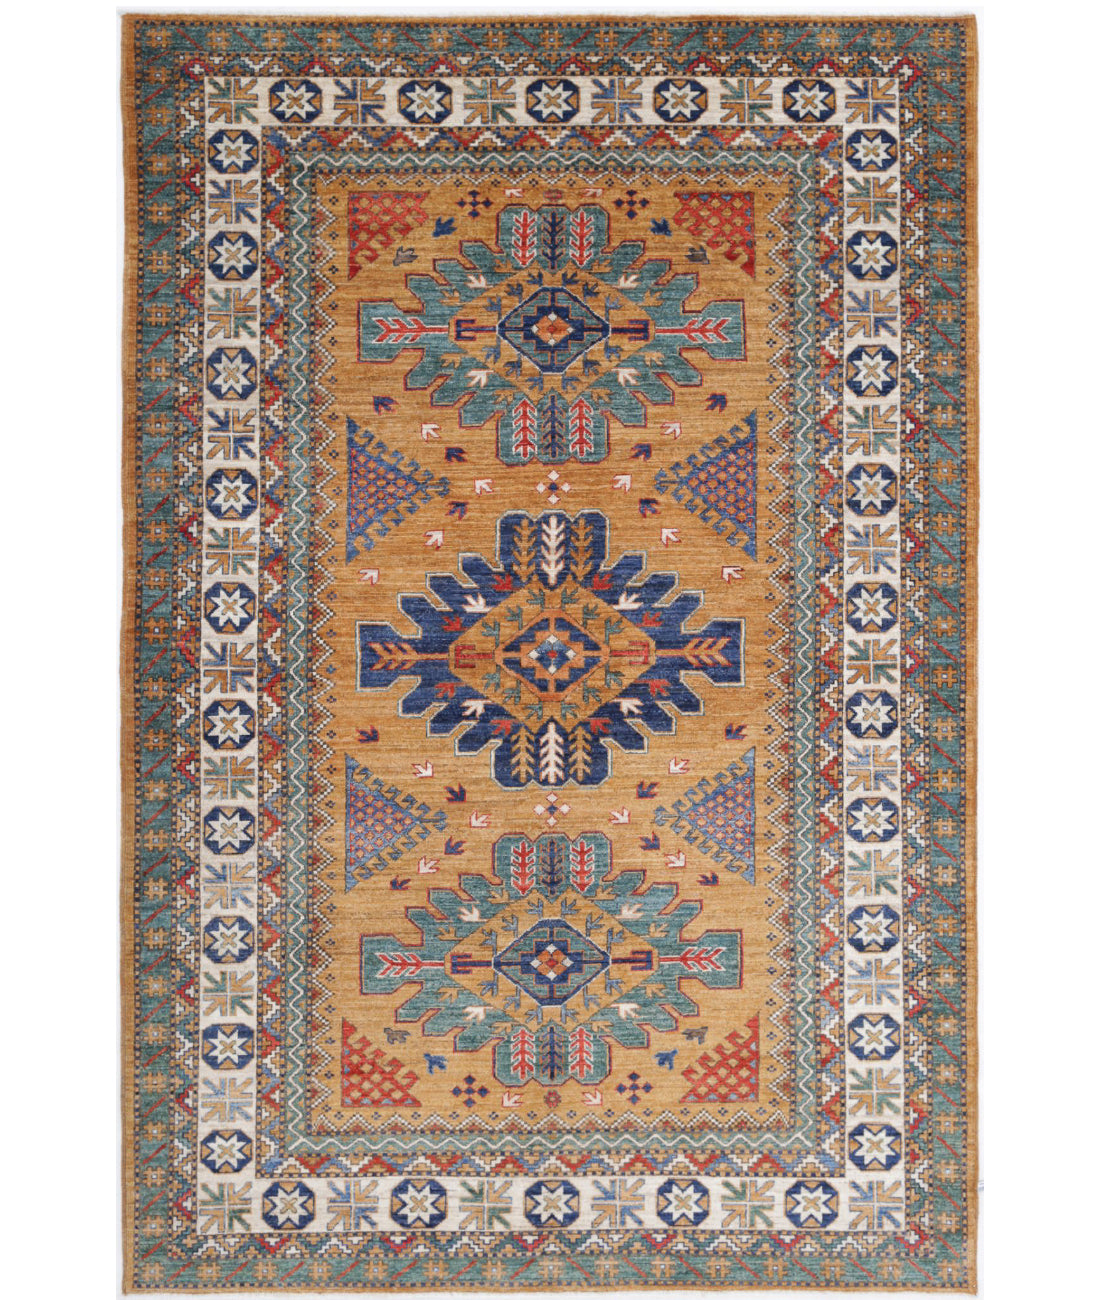 Hand Knotted Nomadic Caucasian Humna Wool Rug - 5'11'' x 9'0'' 5'11'' x 9'0'' (178 X 270) / Gold / Ivory